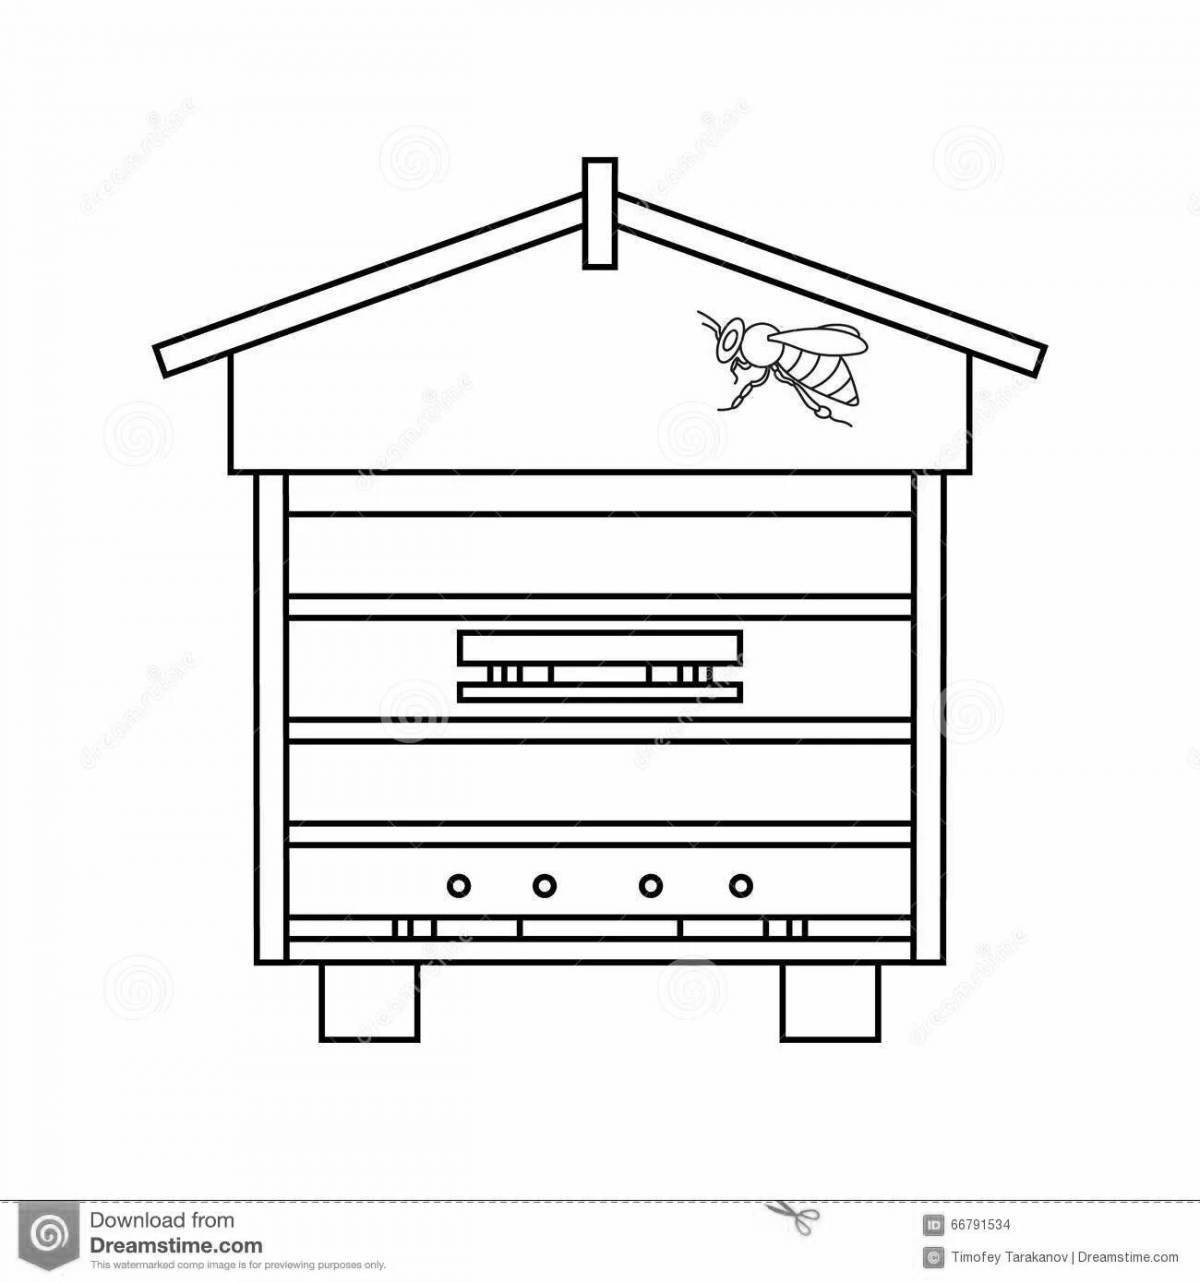 Animated beehive coloring page for kids